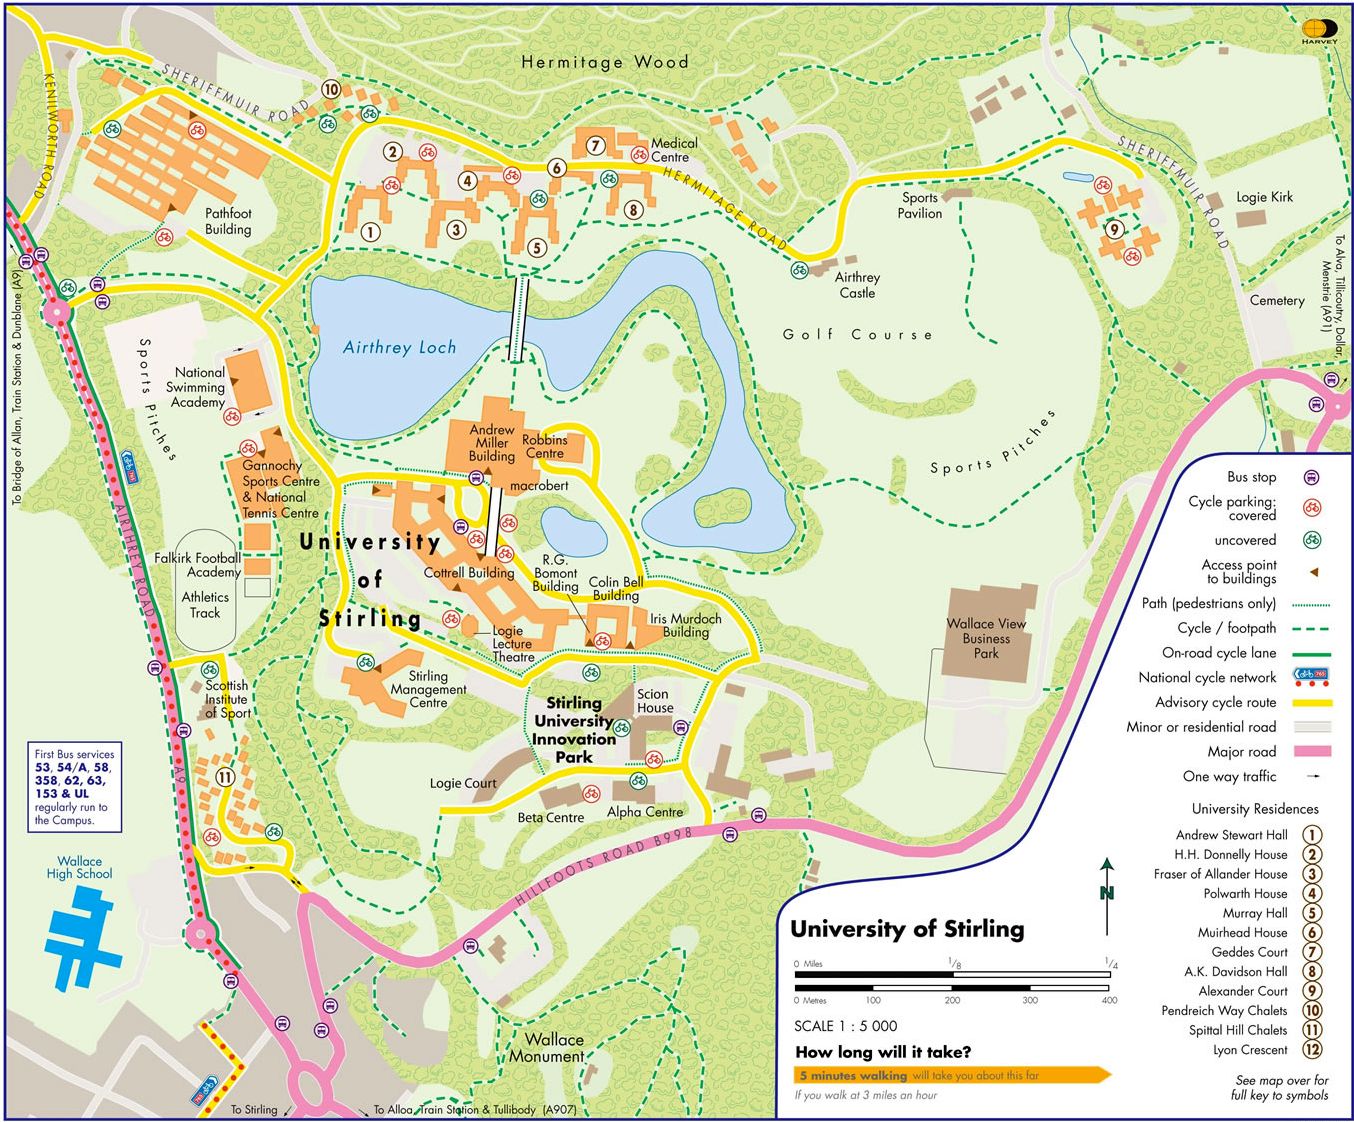 Photographs and map of the historic City of Stirling in Central ...